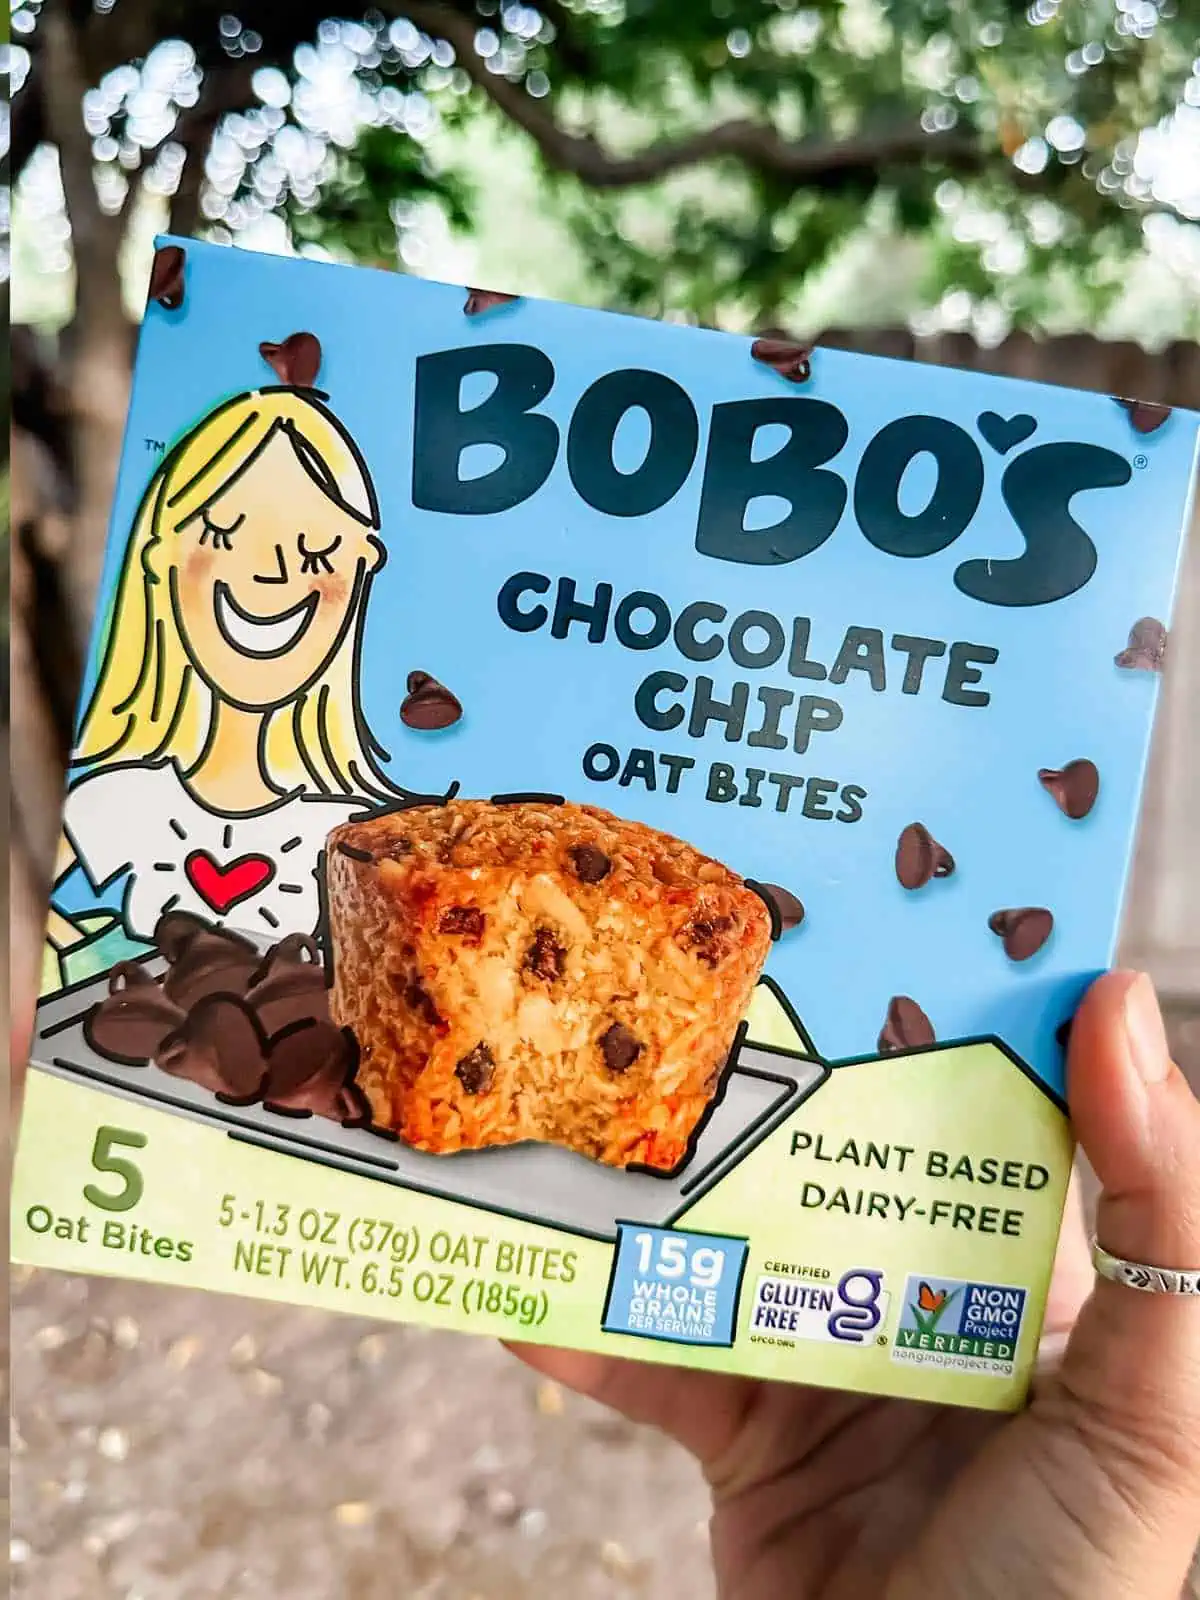 A light blue box of kids chocolate chips pat bites from Bobo's.